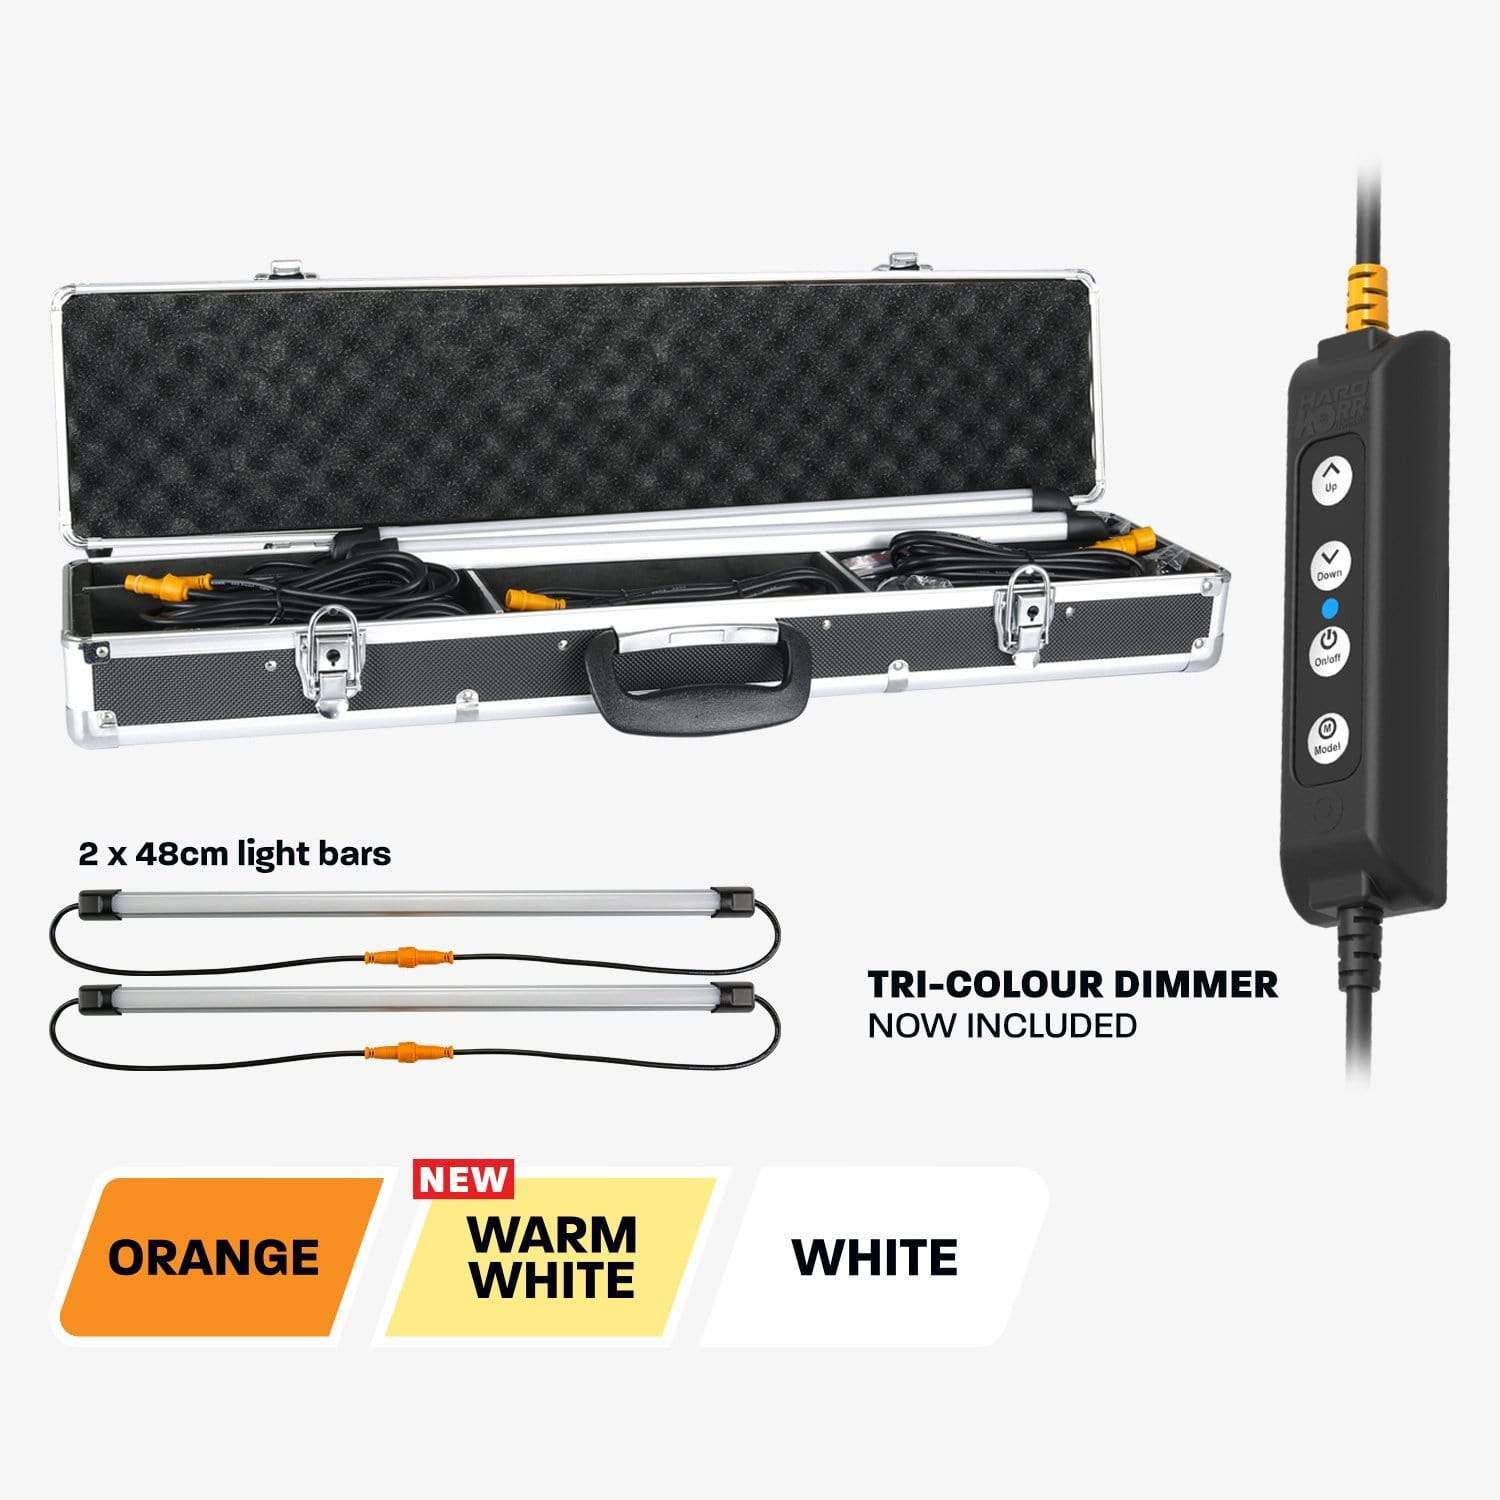 2 Bar Orange/White LED Camping Light Kit With Diffusers